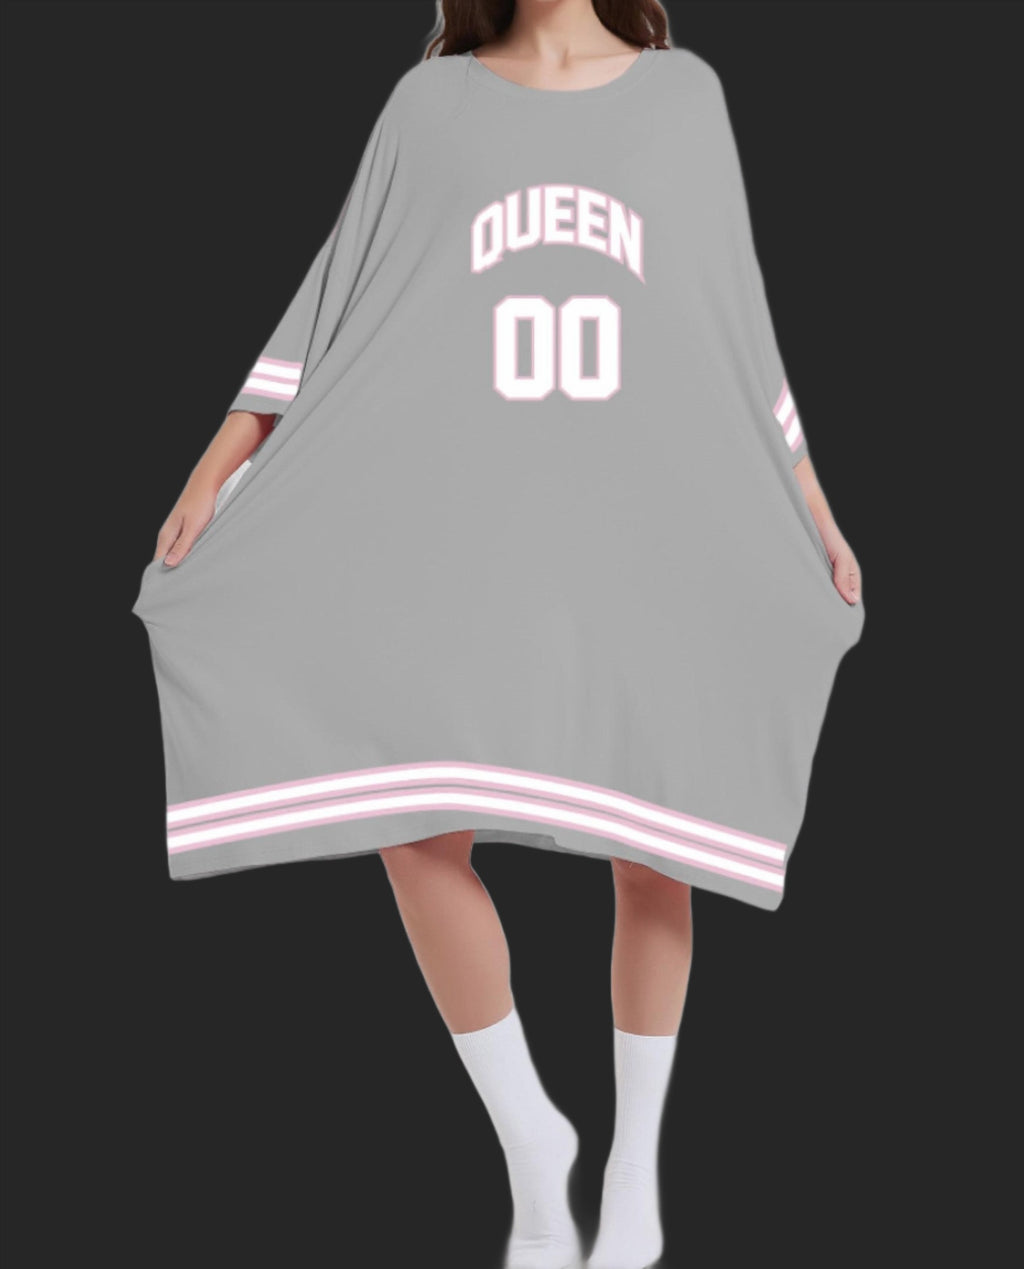 'NEW' QUEEN '00'  Grey and Pink